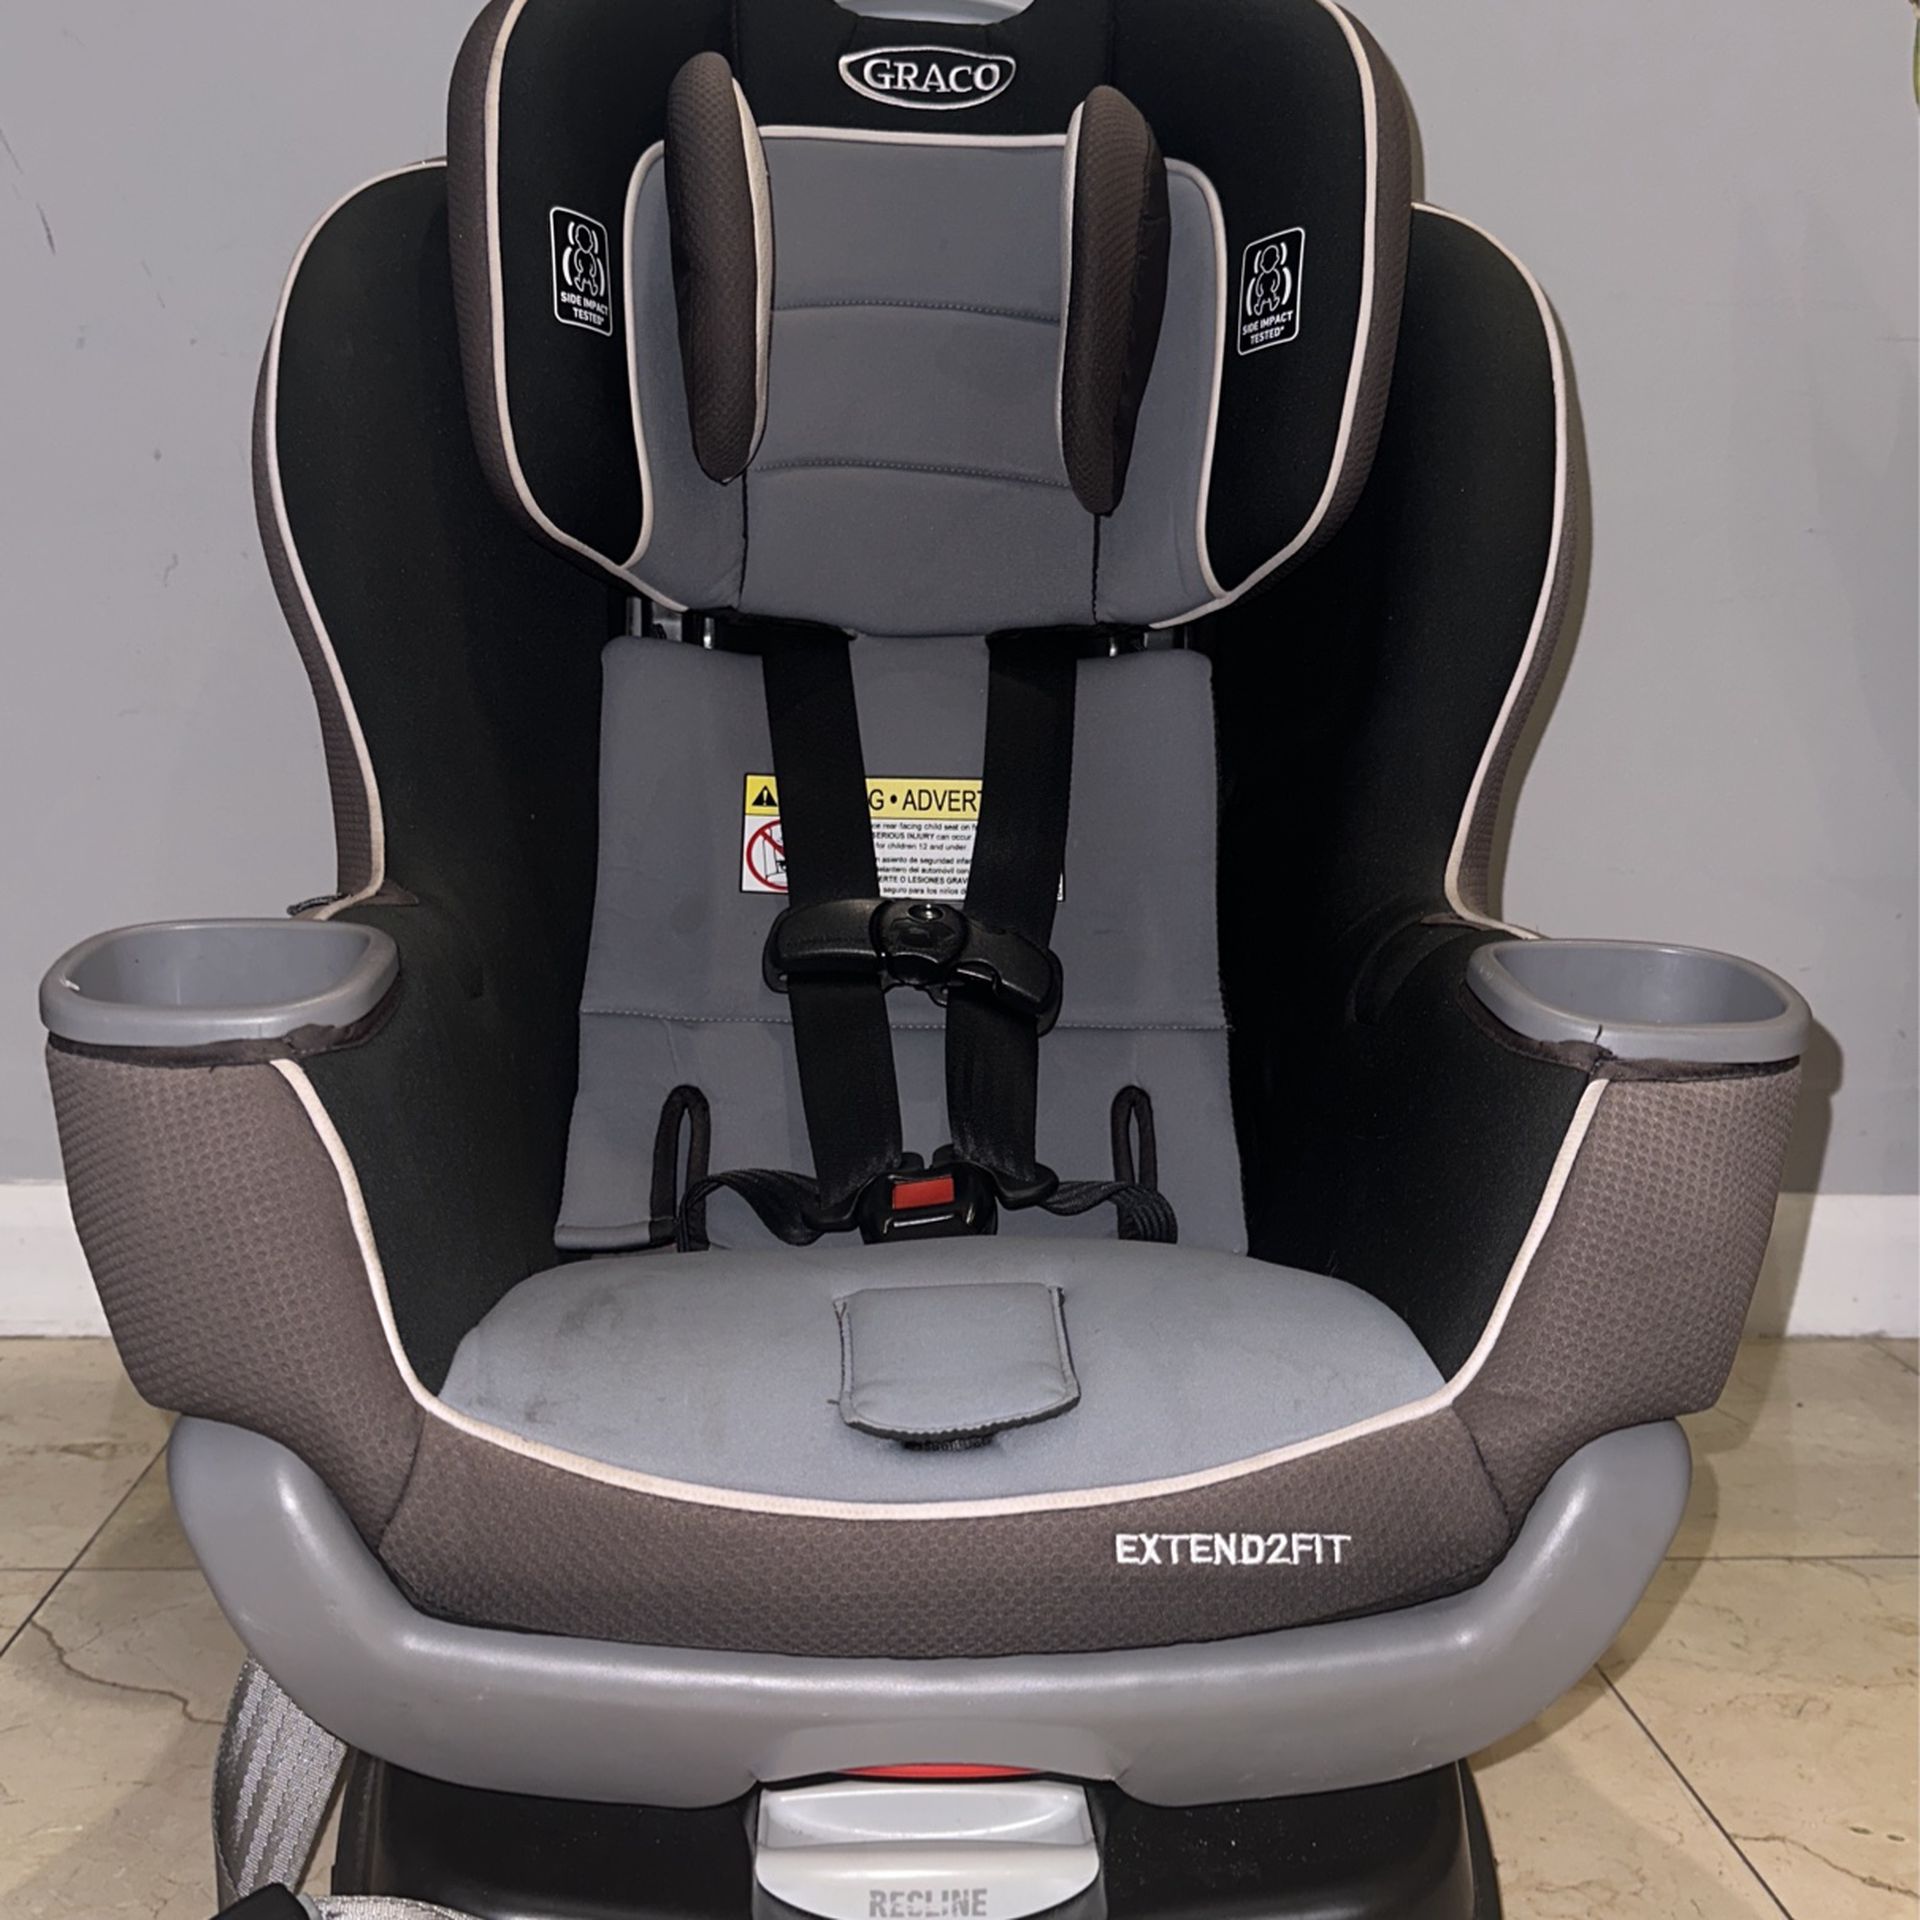 GRACO EXTEND2FIT